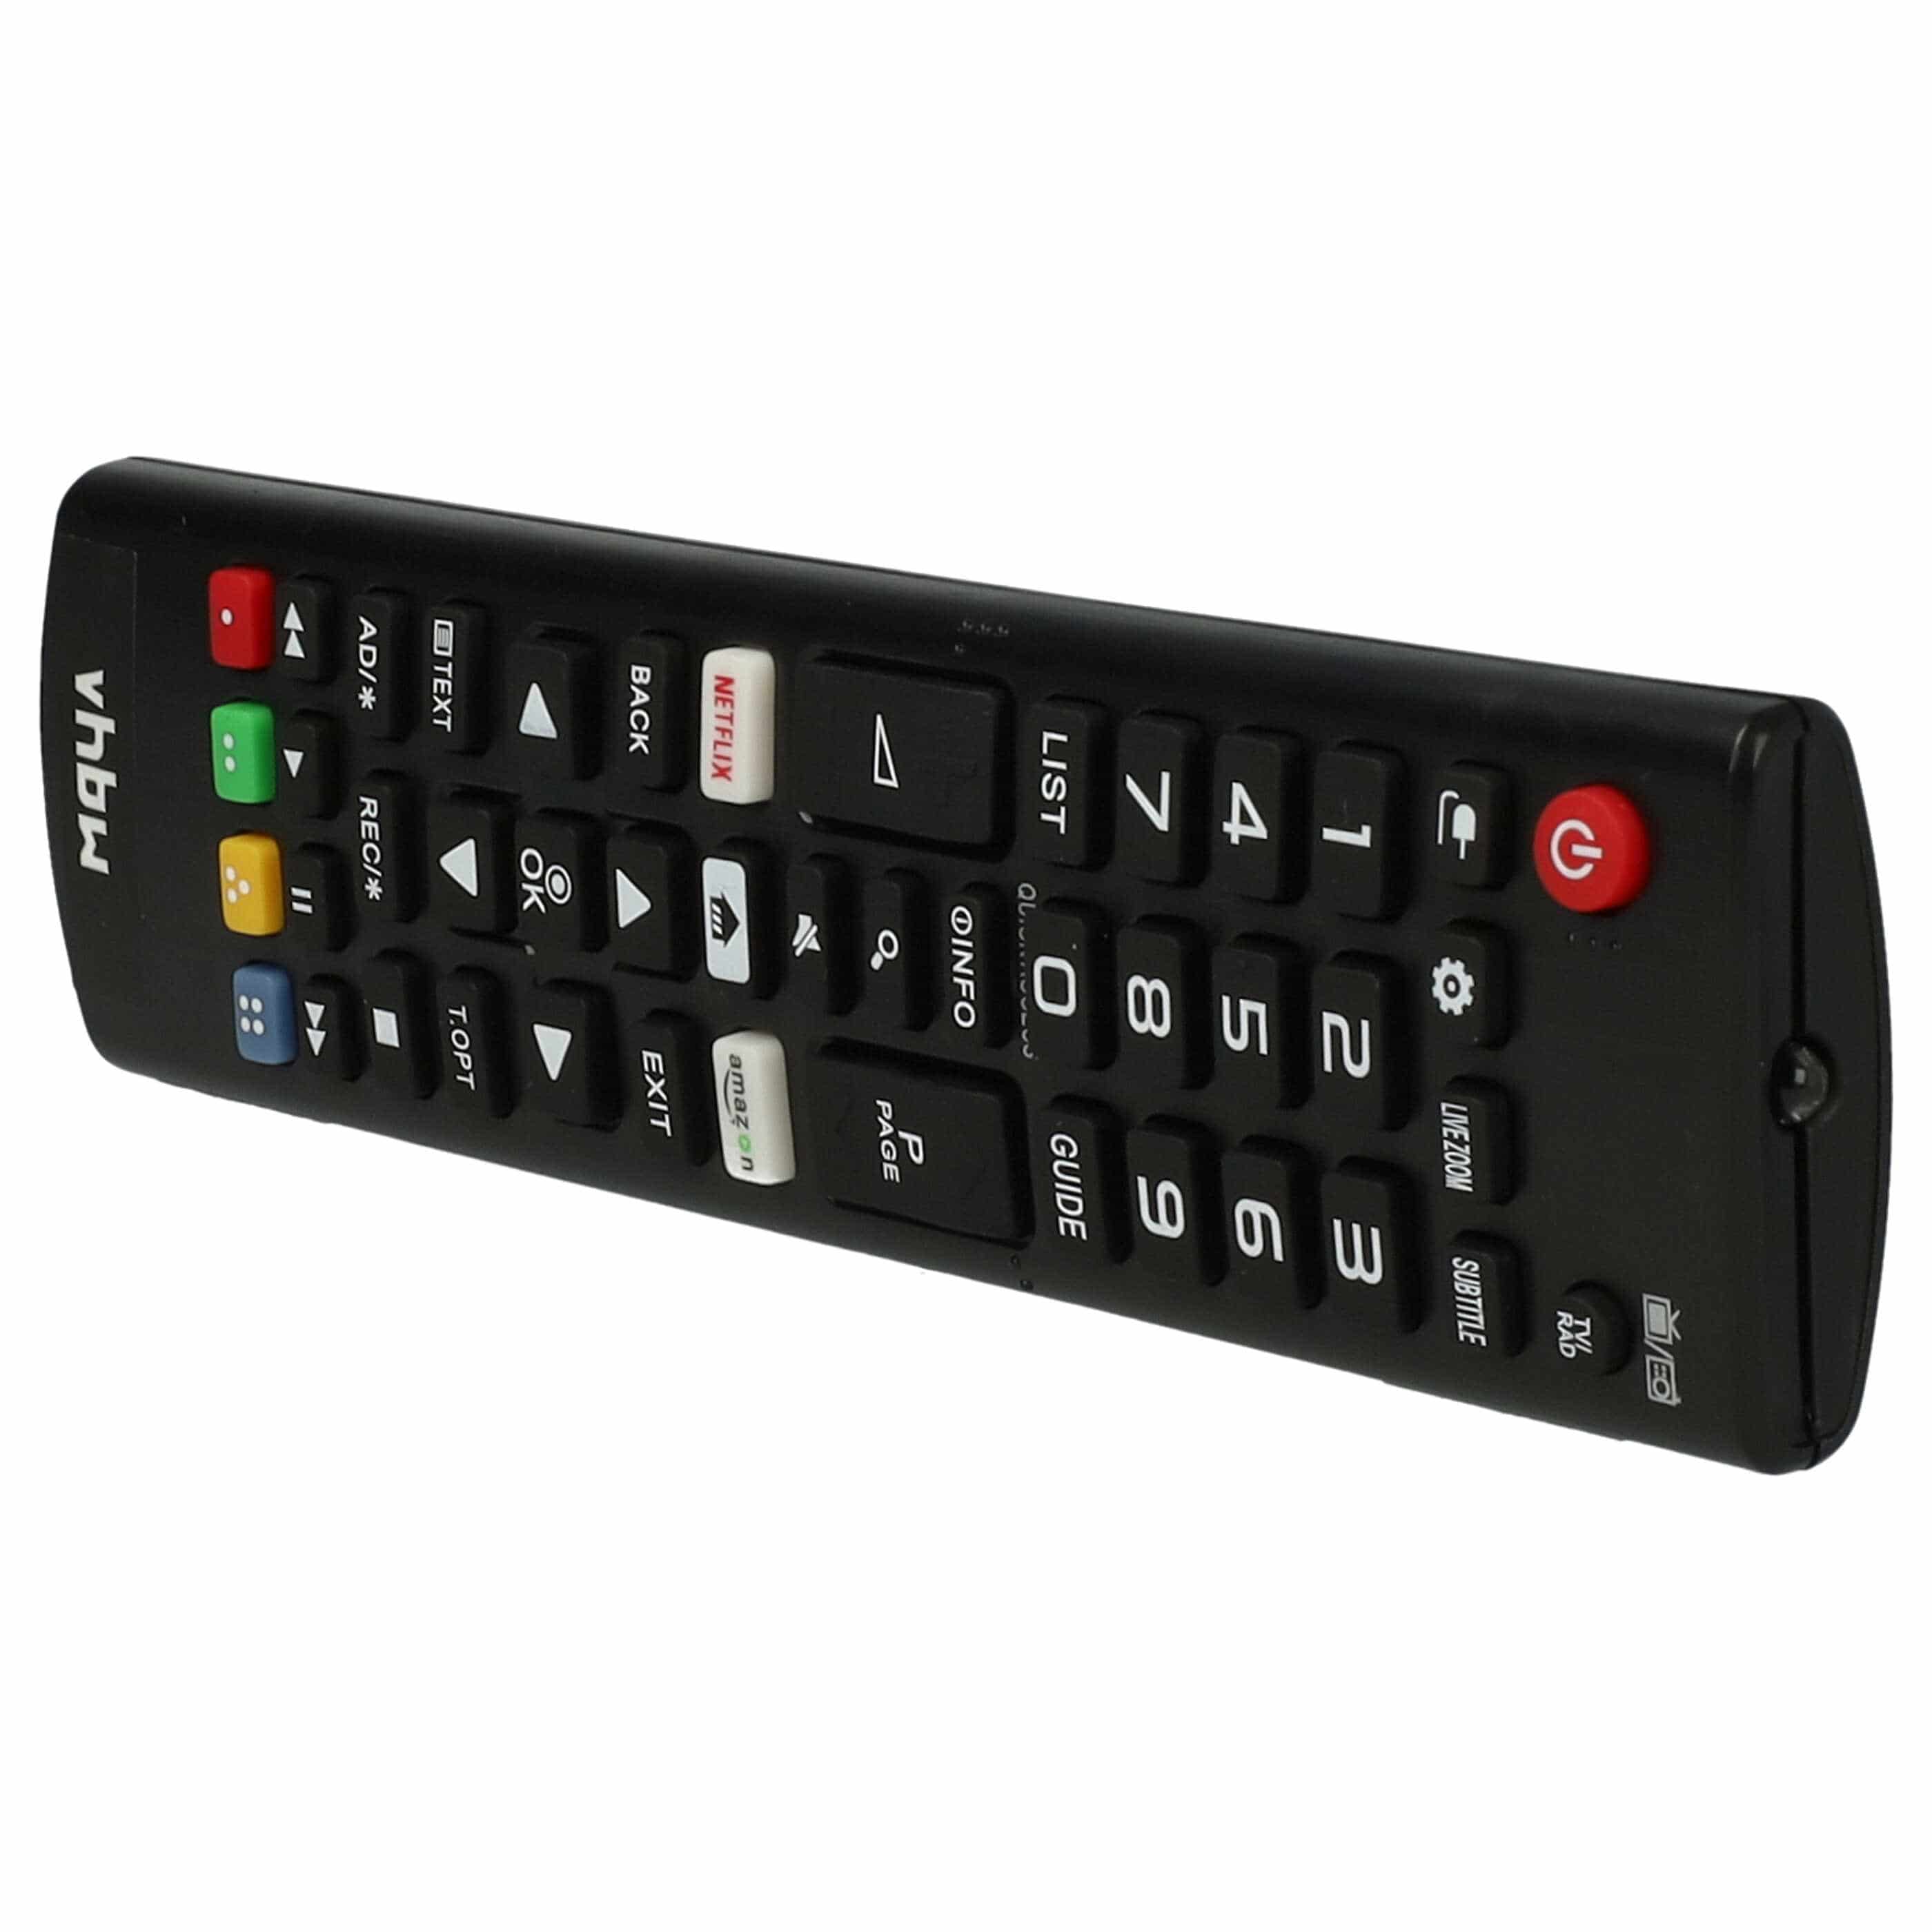 Remote Control replaces LG AKB75375608 for LG TV